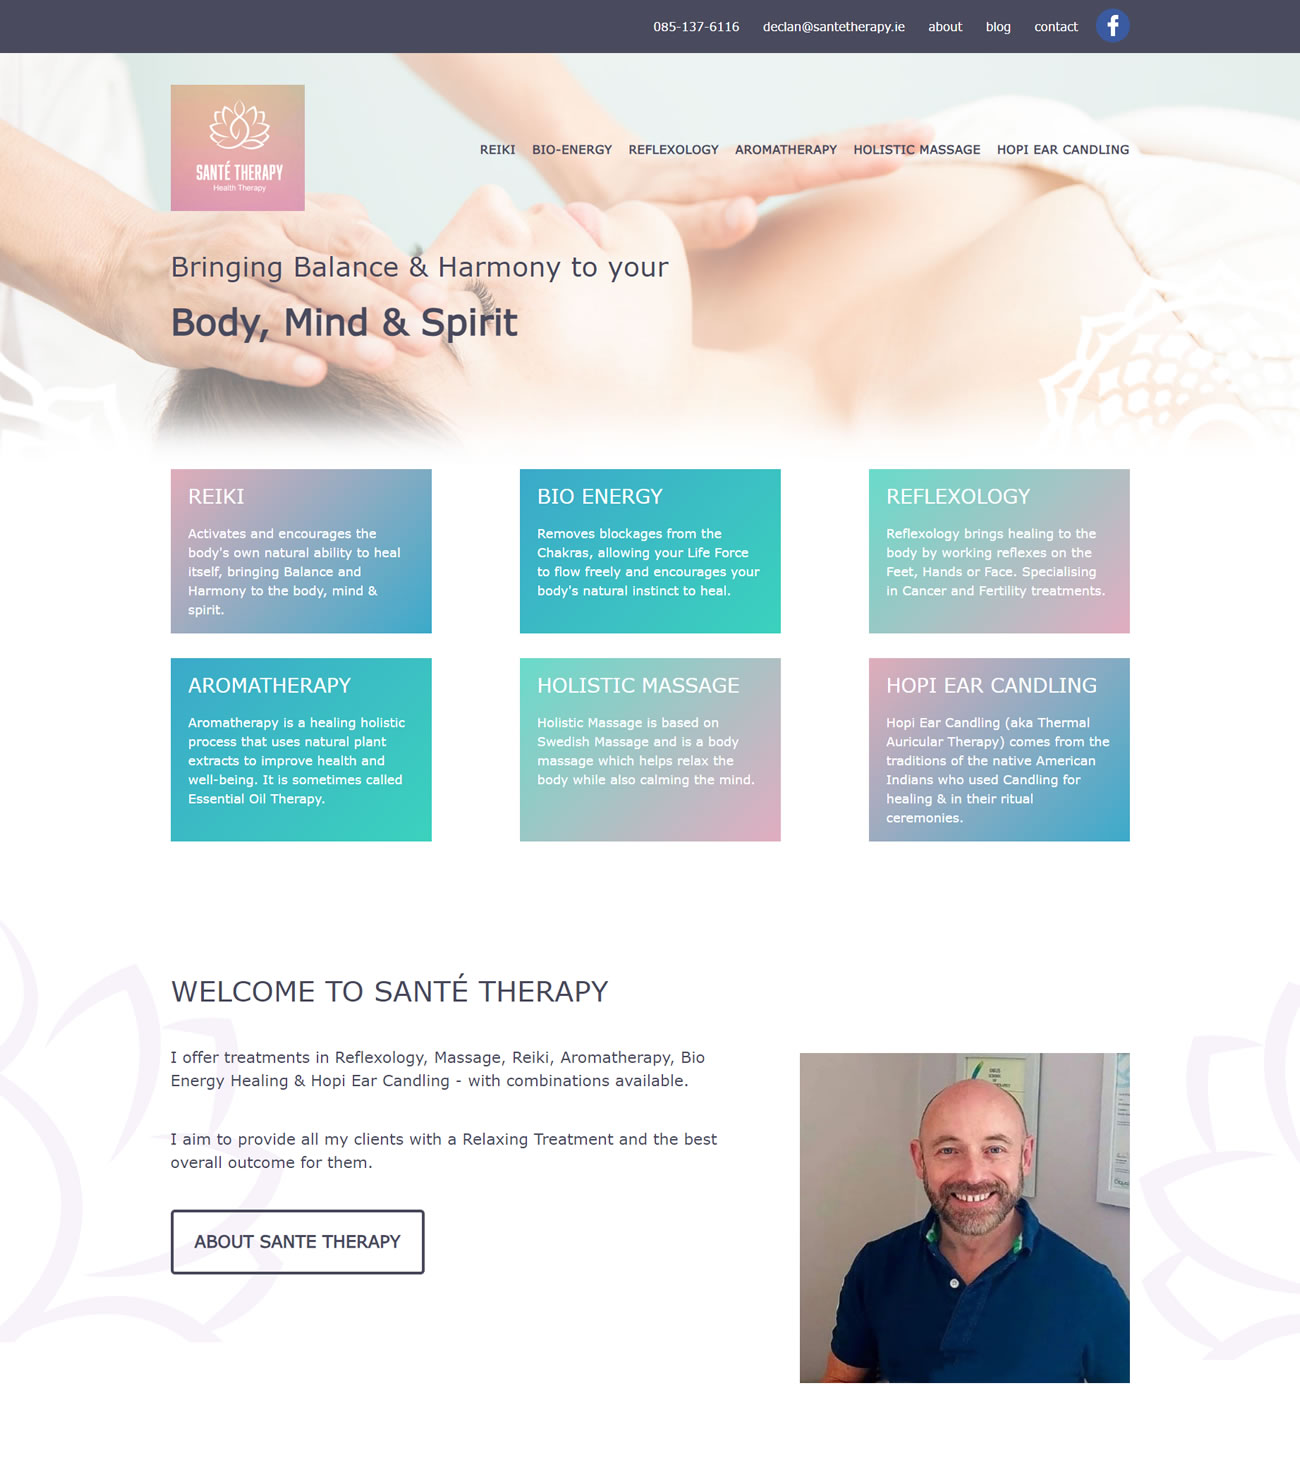 Sante Therapy - new website rebuild, redesign work and site management/hosting